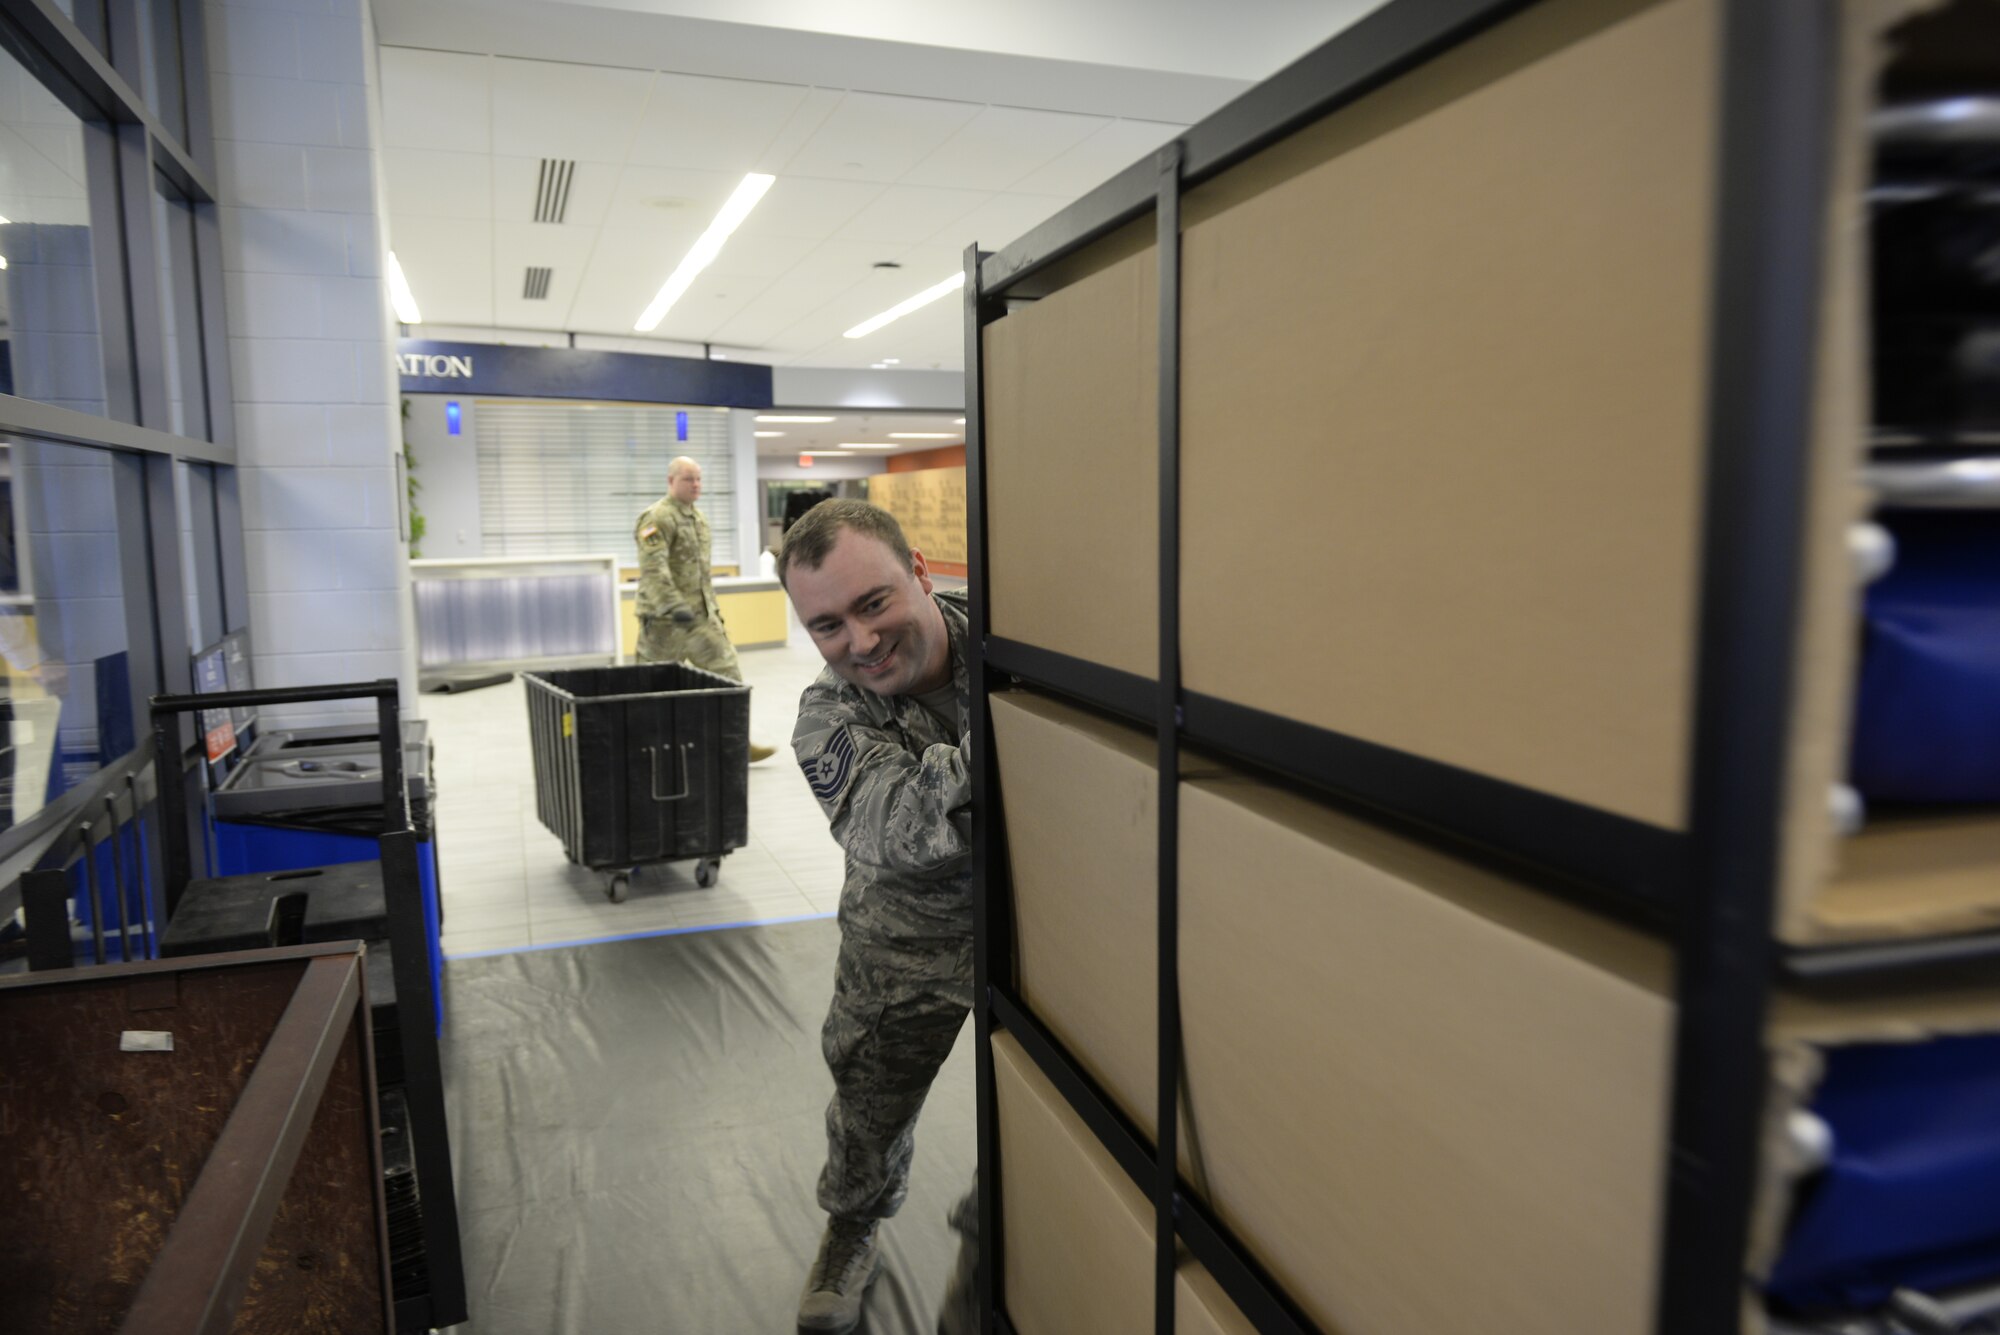 Tech. Sgt. Lance Whitehill, 157th Civil Engineers Squadron, New Hampshire Air National Guard, brings supplies into the Hamel Recreation Center at the University of New Hampshire, March 25, 2020. The facility will augment area hospitals treating COVID-19 cases, if necessary. It is one of nine the NHNG plans to set up and manage across the state. (U.S. Air National Guard photo by Tech. Sgt. Aaron Vezeau)